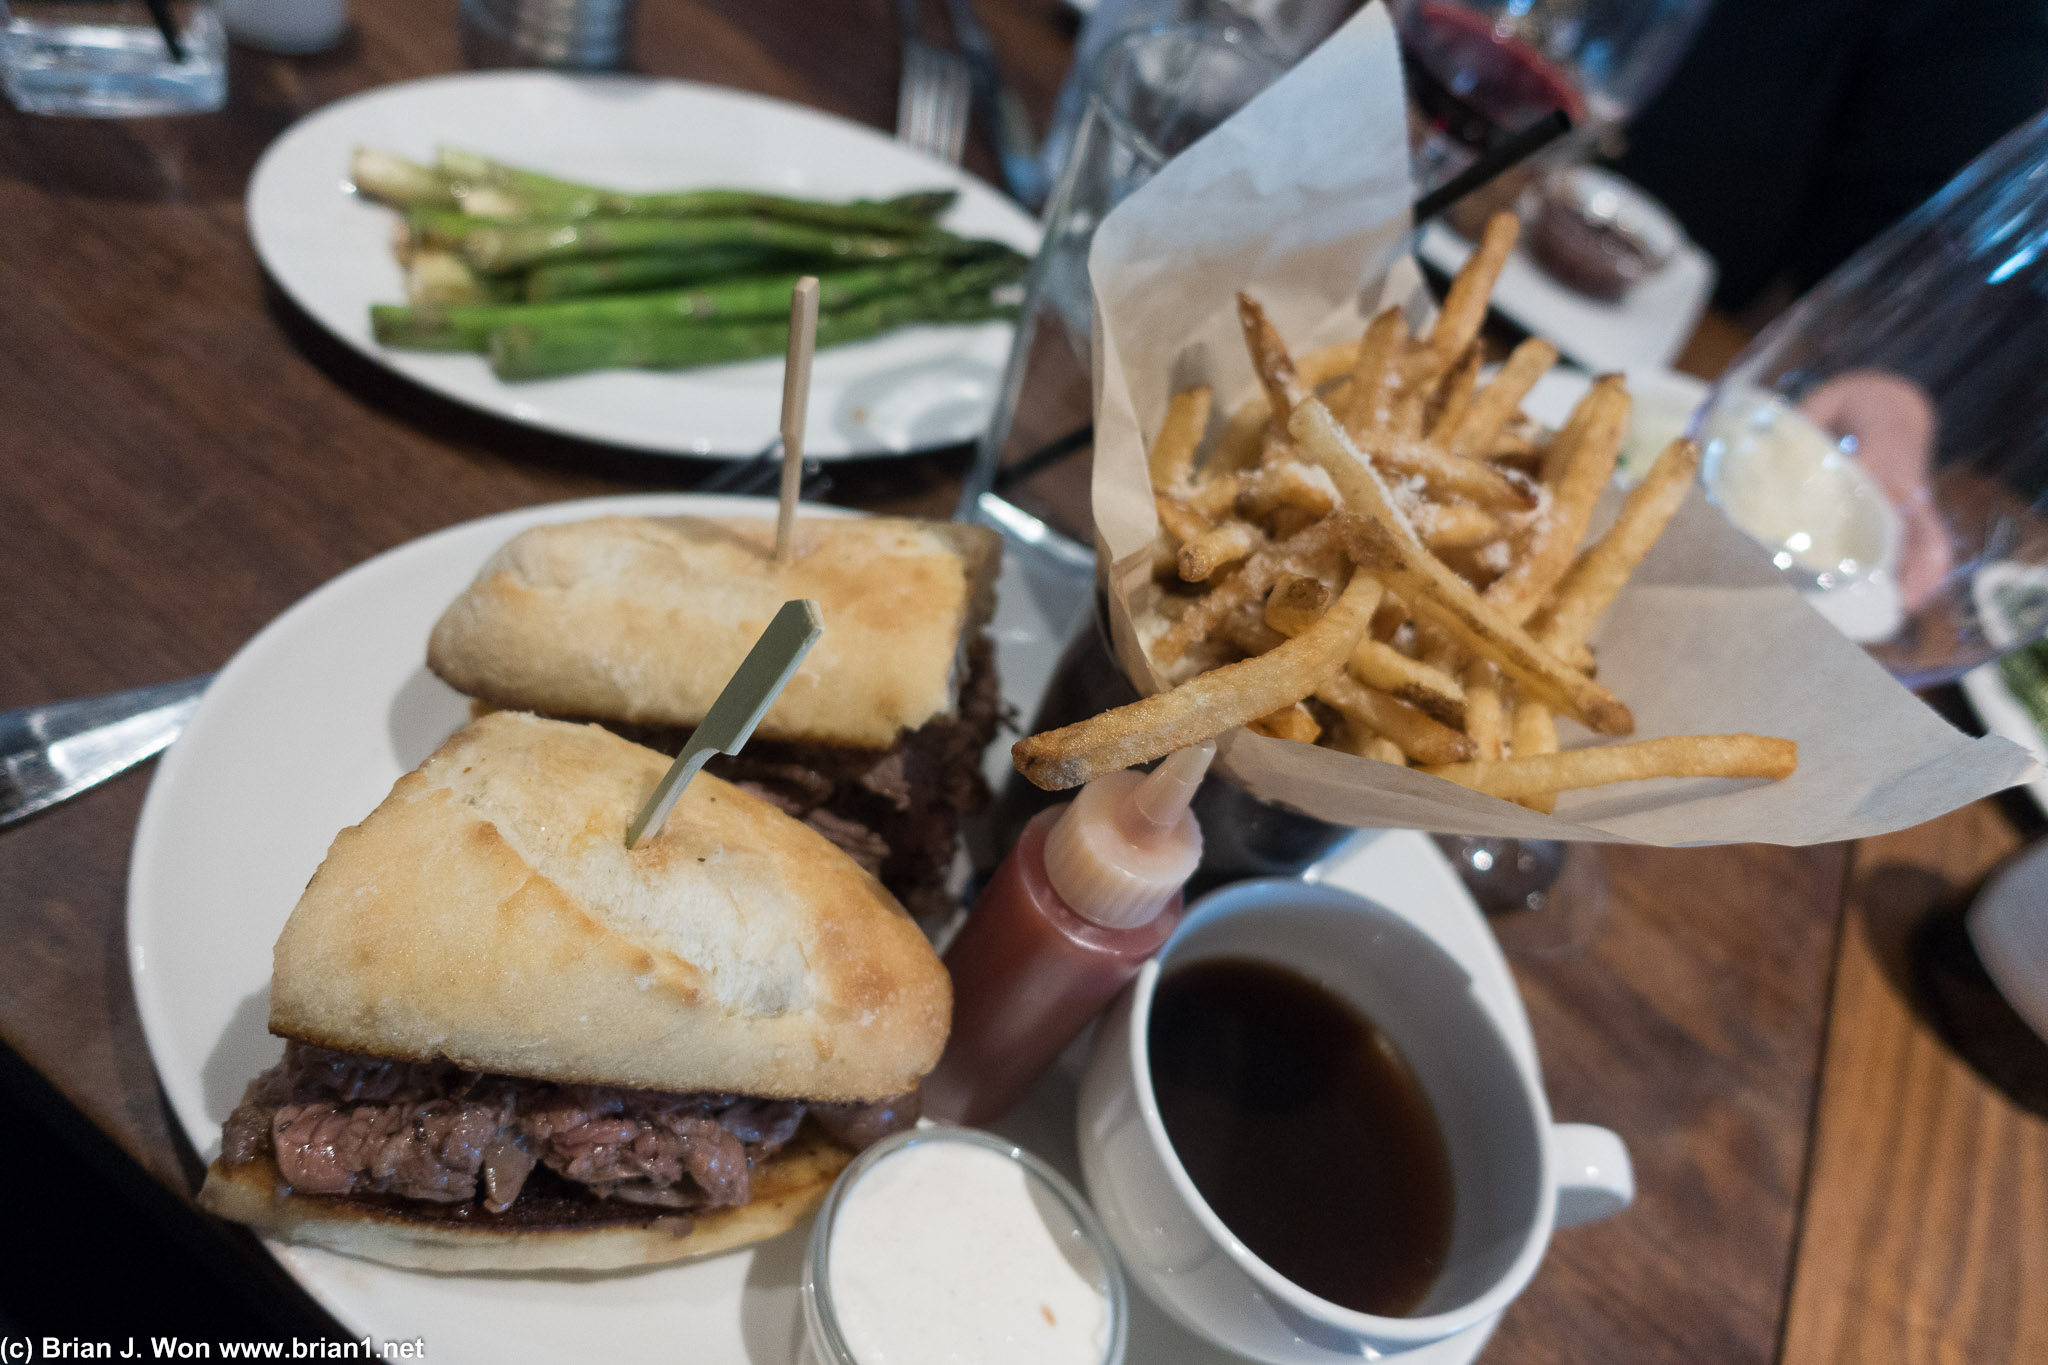 French dip and fries. Asparagus in background.